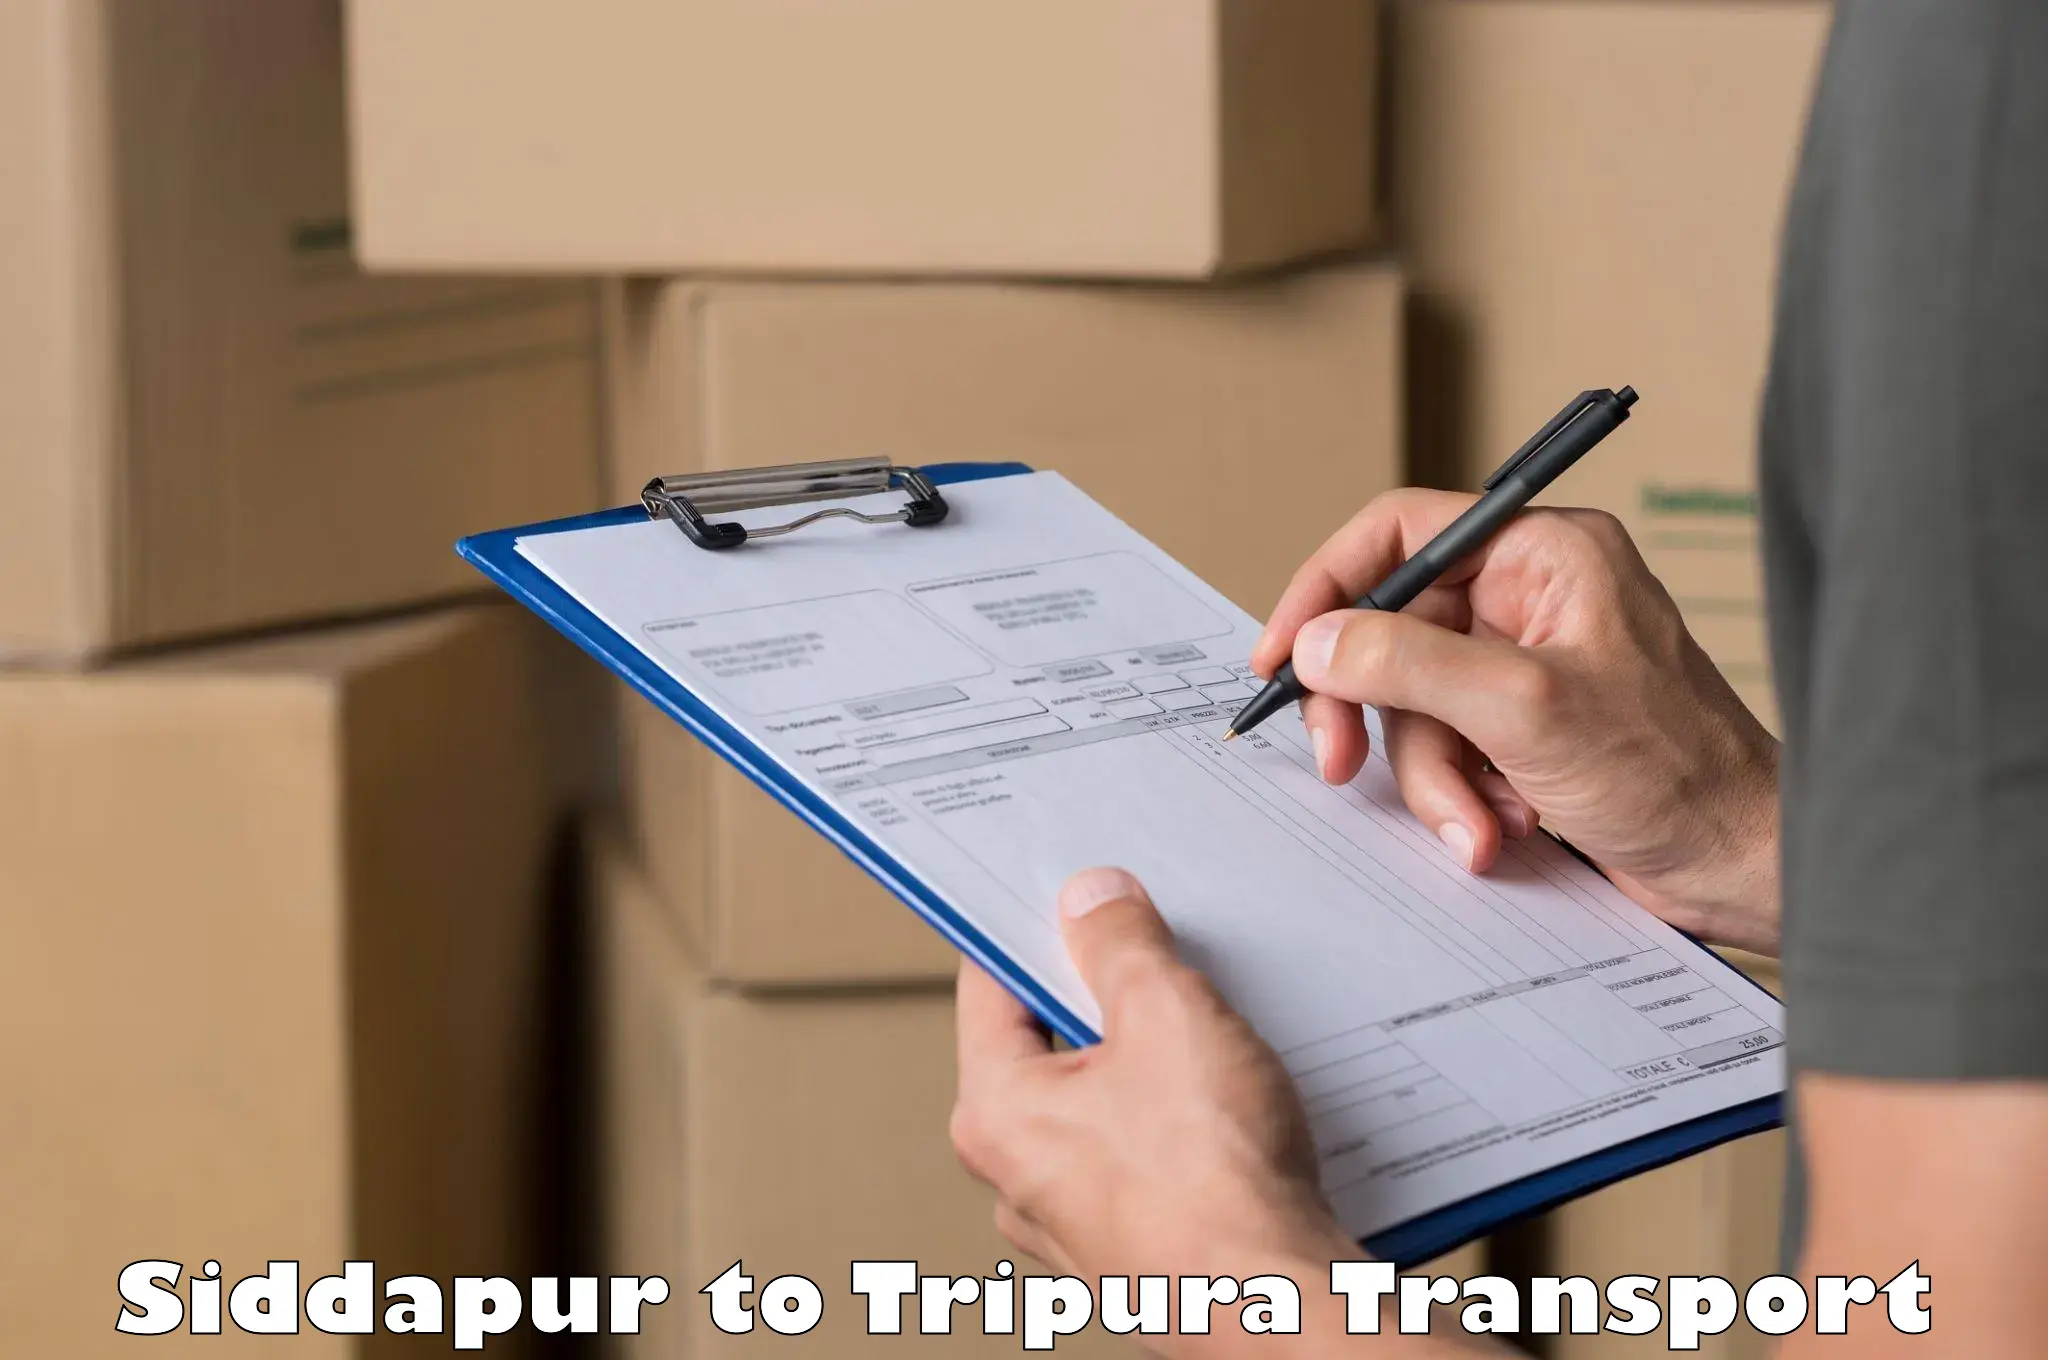 Transport shared services Siddapur to Udaipur Tripura